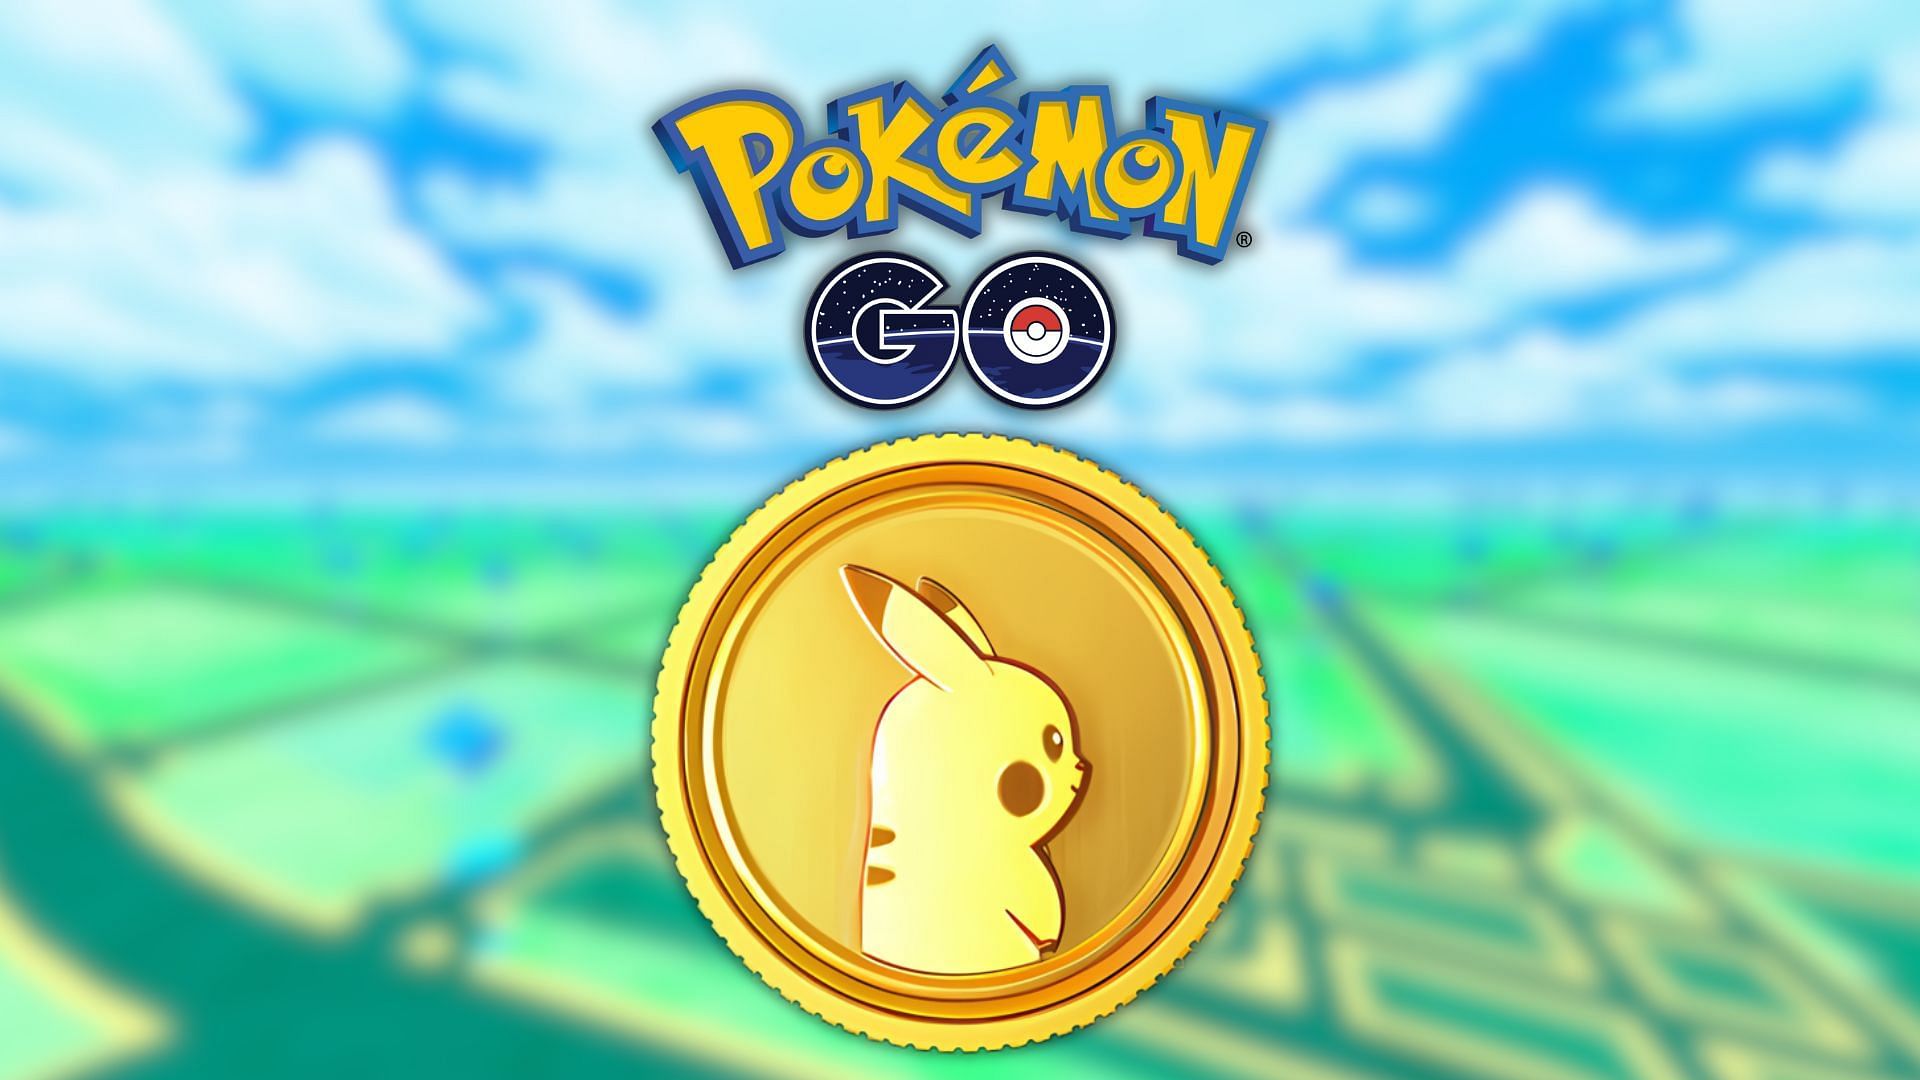 How to get PokeCoins in Pokemon GO?